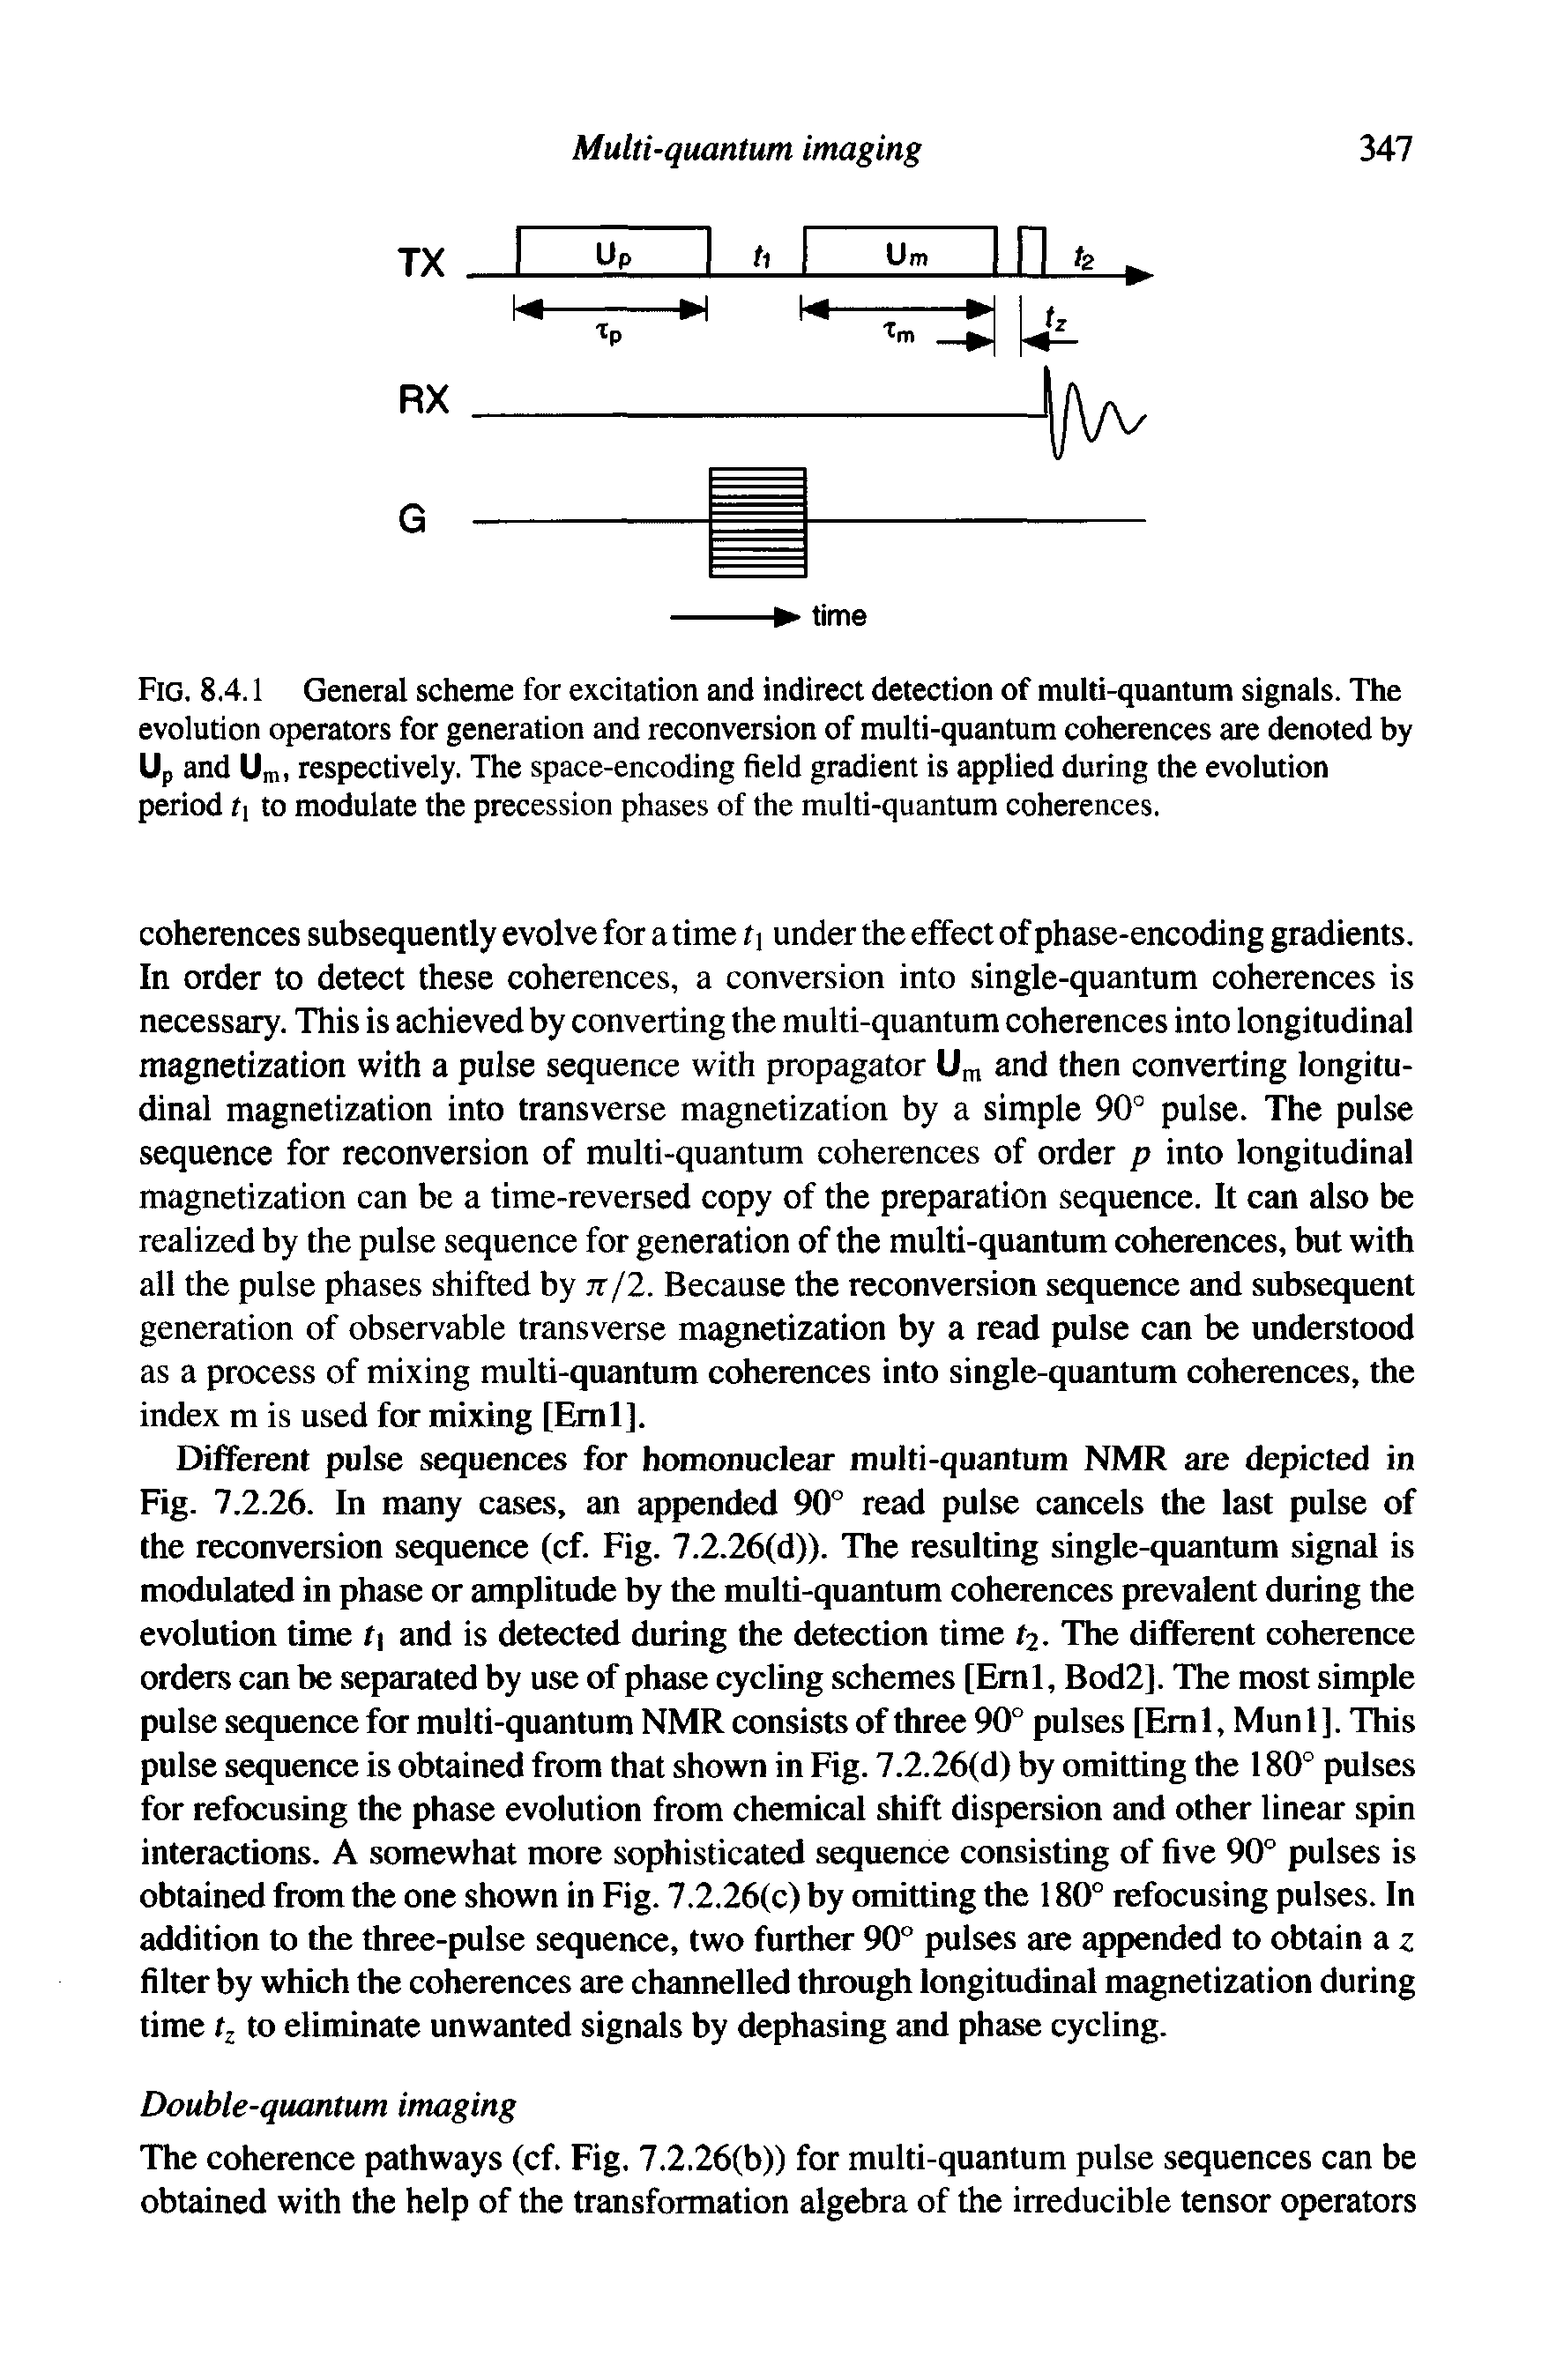 Fig. 8.4.1 General scheme for excitation and indirect detection of multi-quantum signals. The evolution operators for generation and reconversion of multi-quantum coherences are denoted by Up and Umi respectively. The space-encoding field gradient is applied during the evolution period t to modulate the precession phases of the multi-quantum coherences.